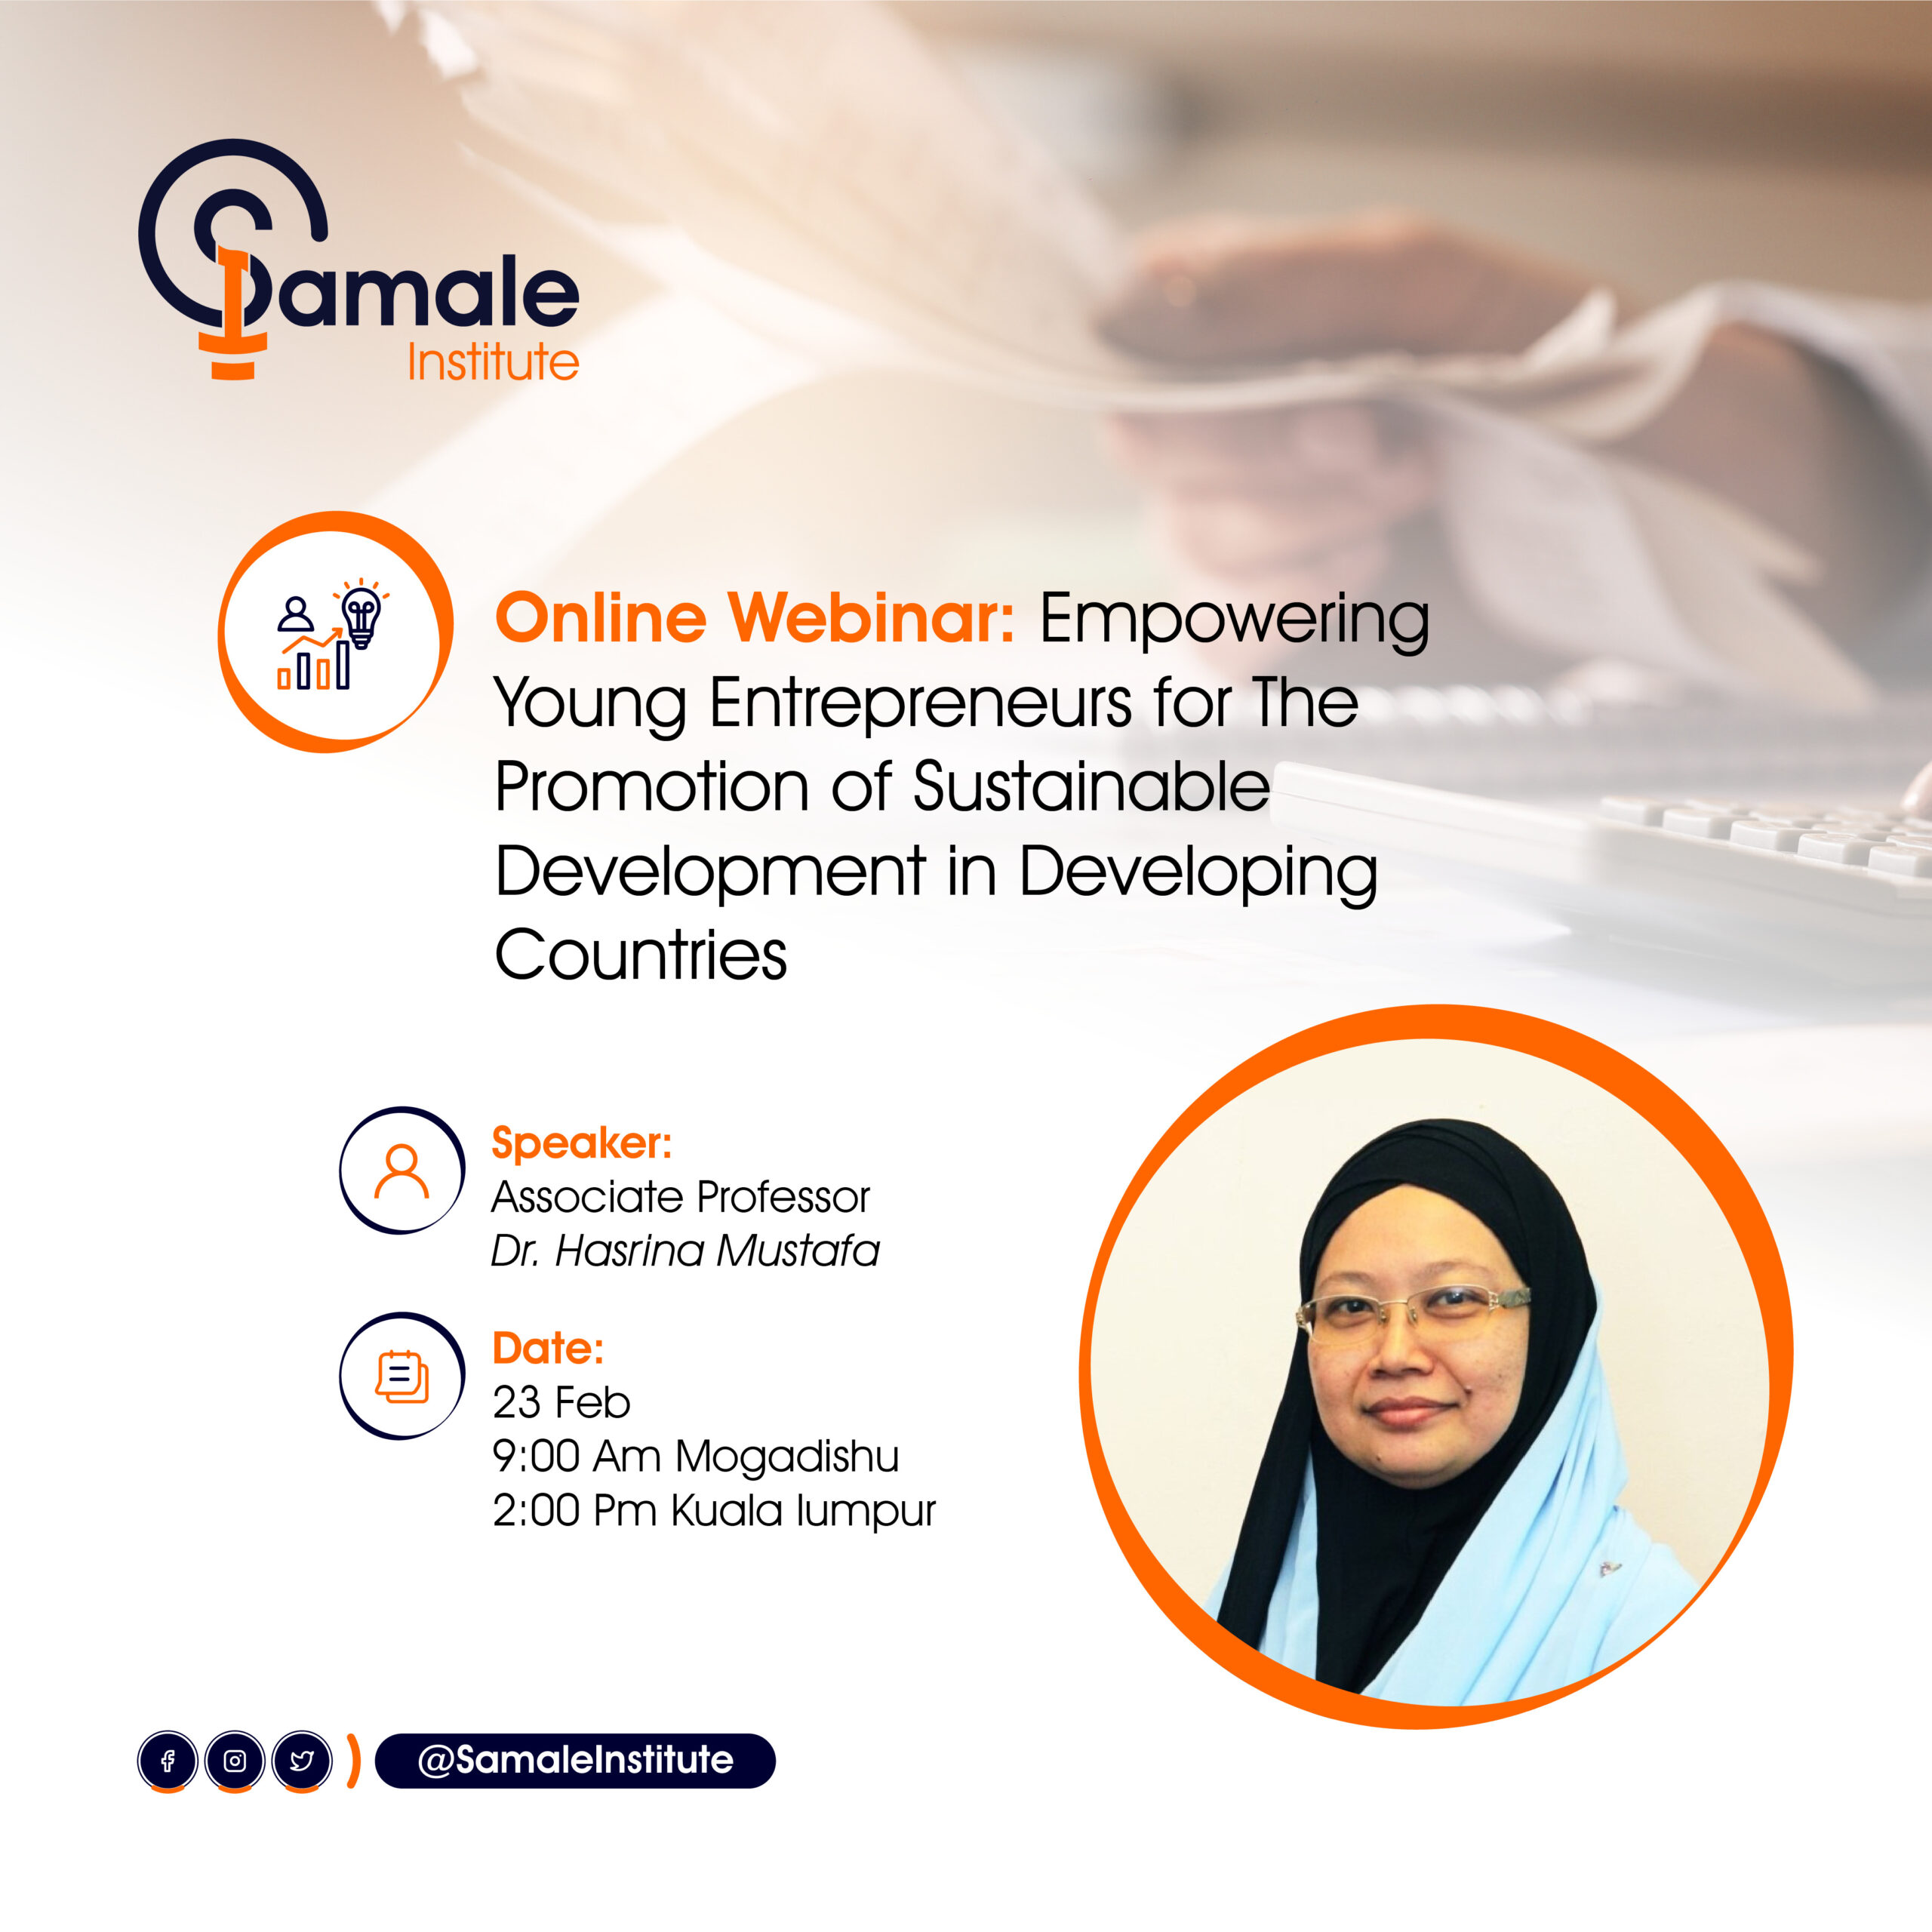 Online Webinar: Empowering Young Entrepreneurs for the Promotion  of Sustainable Development in Developing Countries